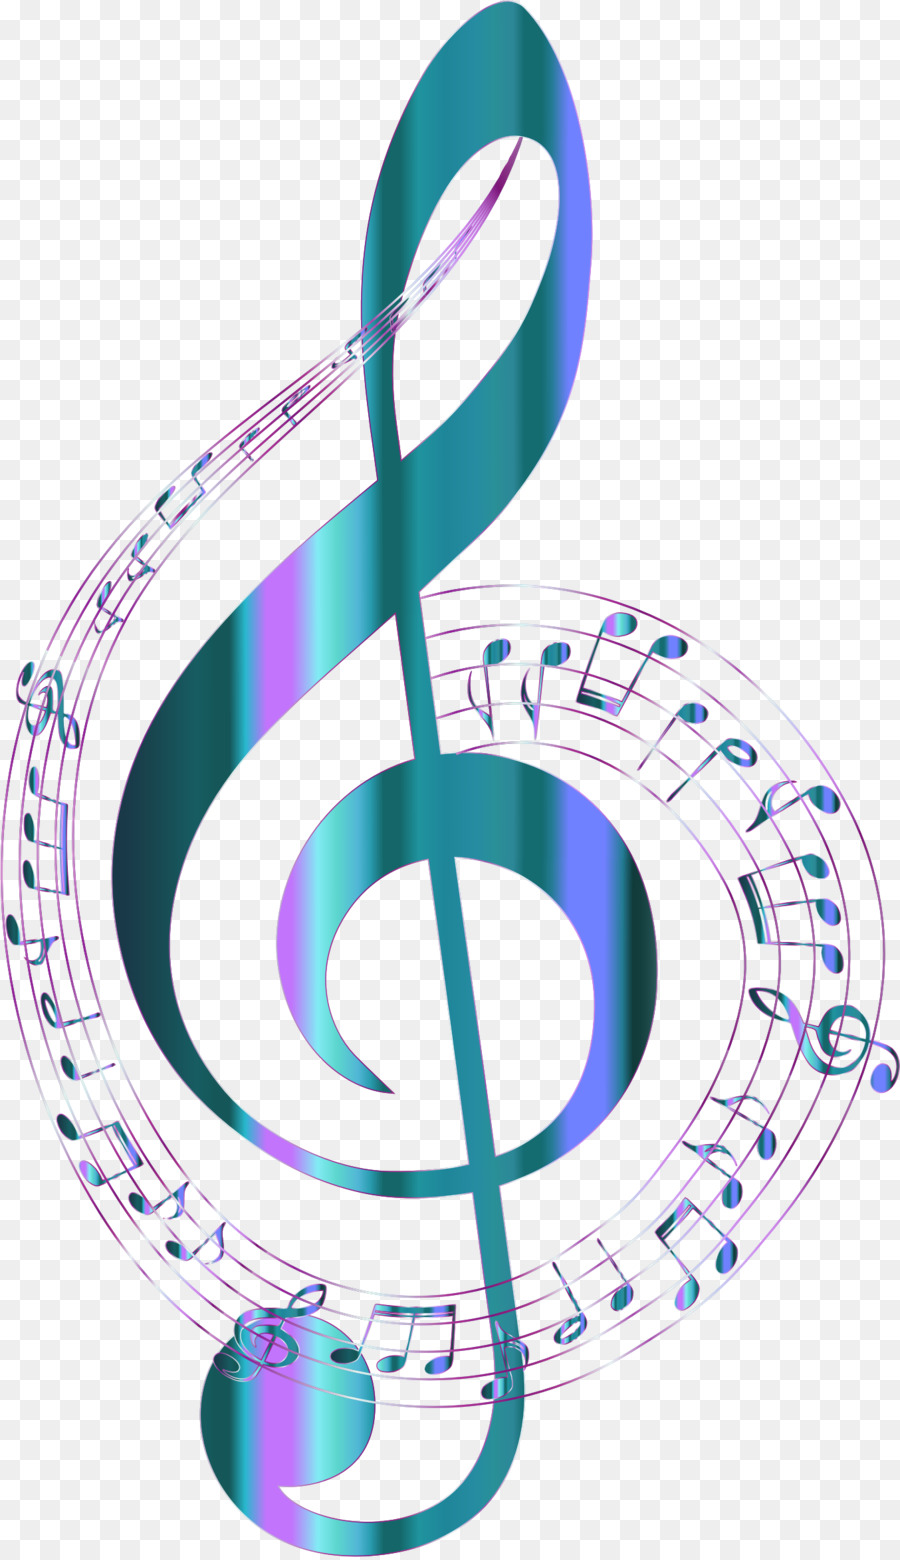 Musical note Clip art - Notes png download - 1354*2342 - Free Transparent  png Download.